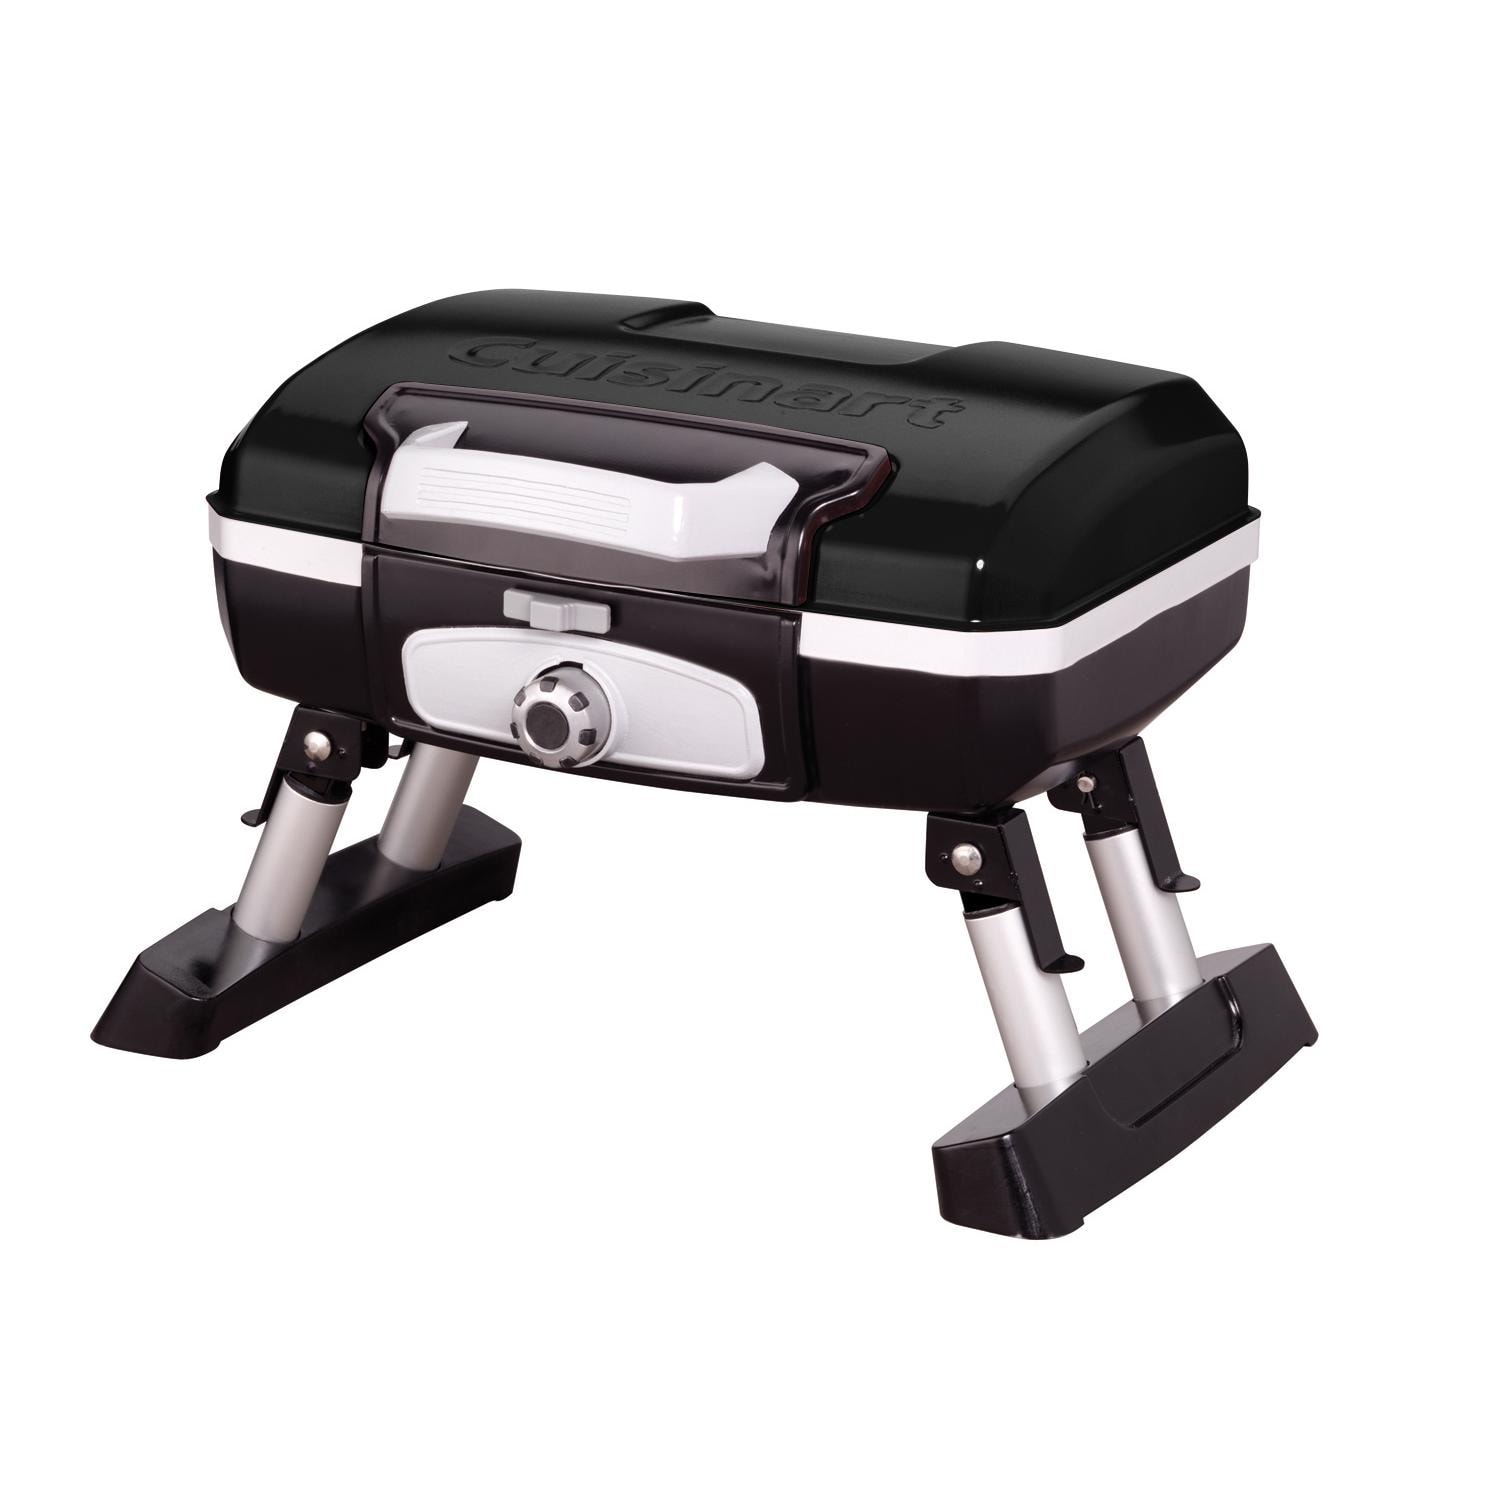 Cuisinart Petite Gourmet Portable Tabletop Gas Grill - image 1 of 3